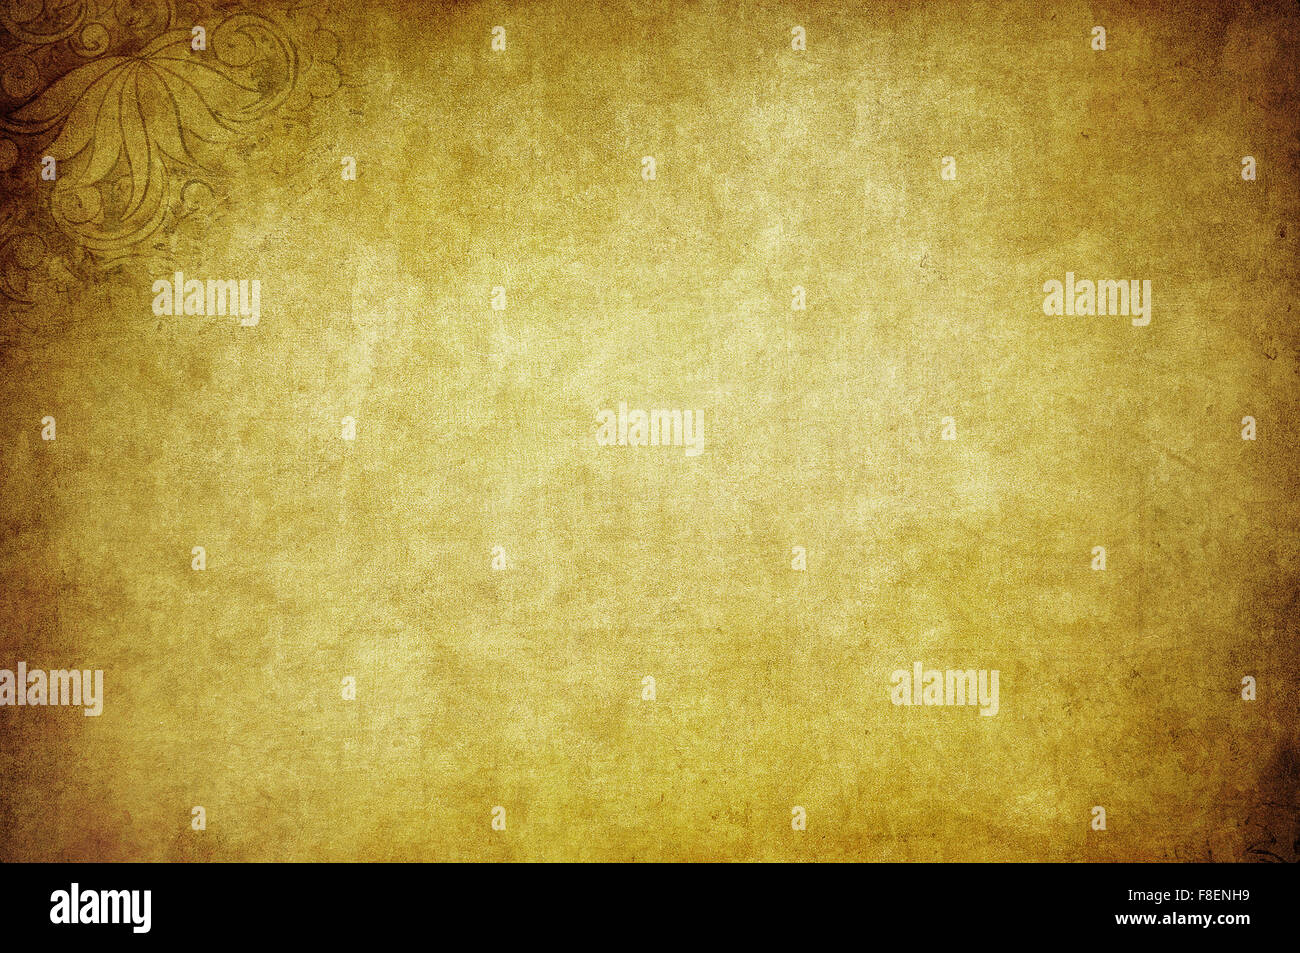 grunge floral background with space for text or image Stock Photo